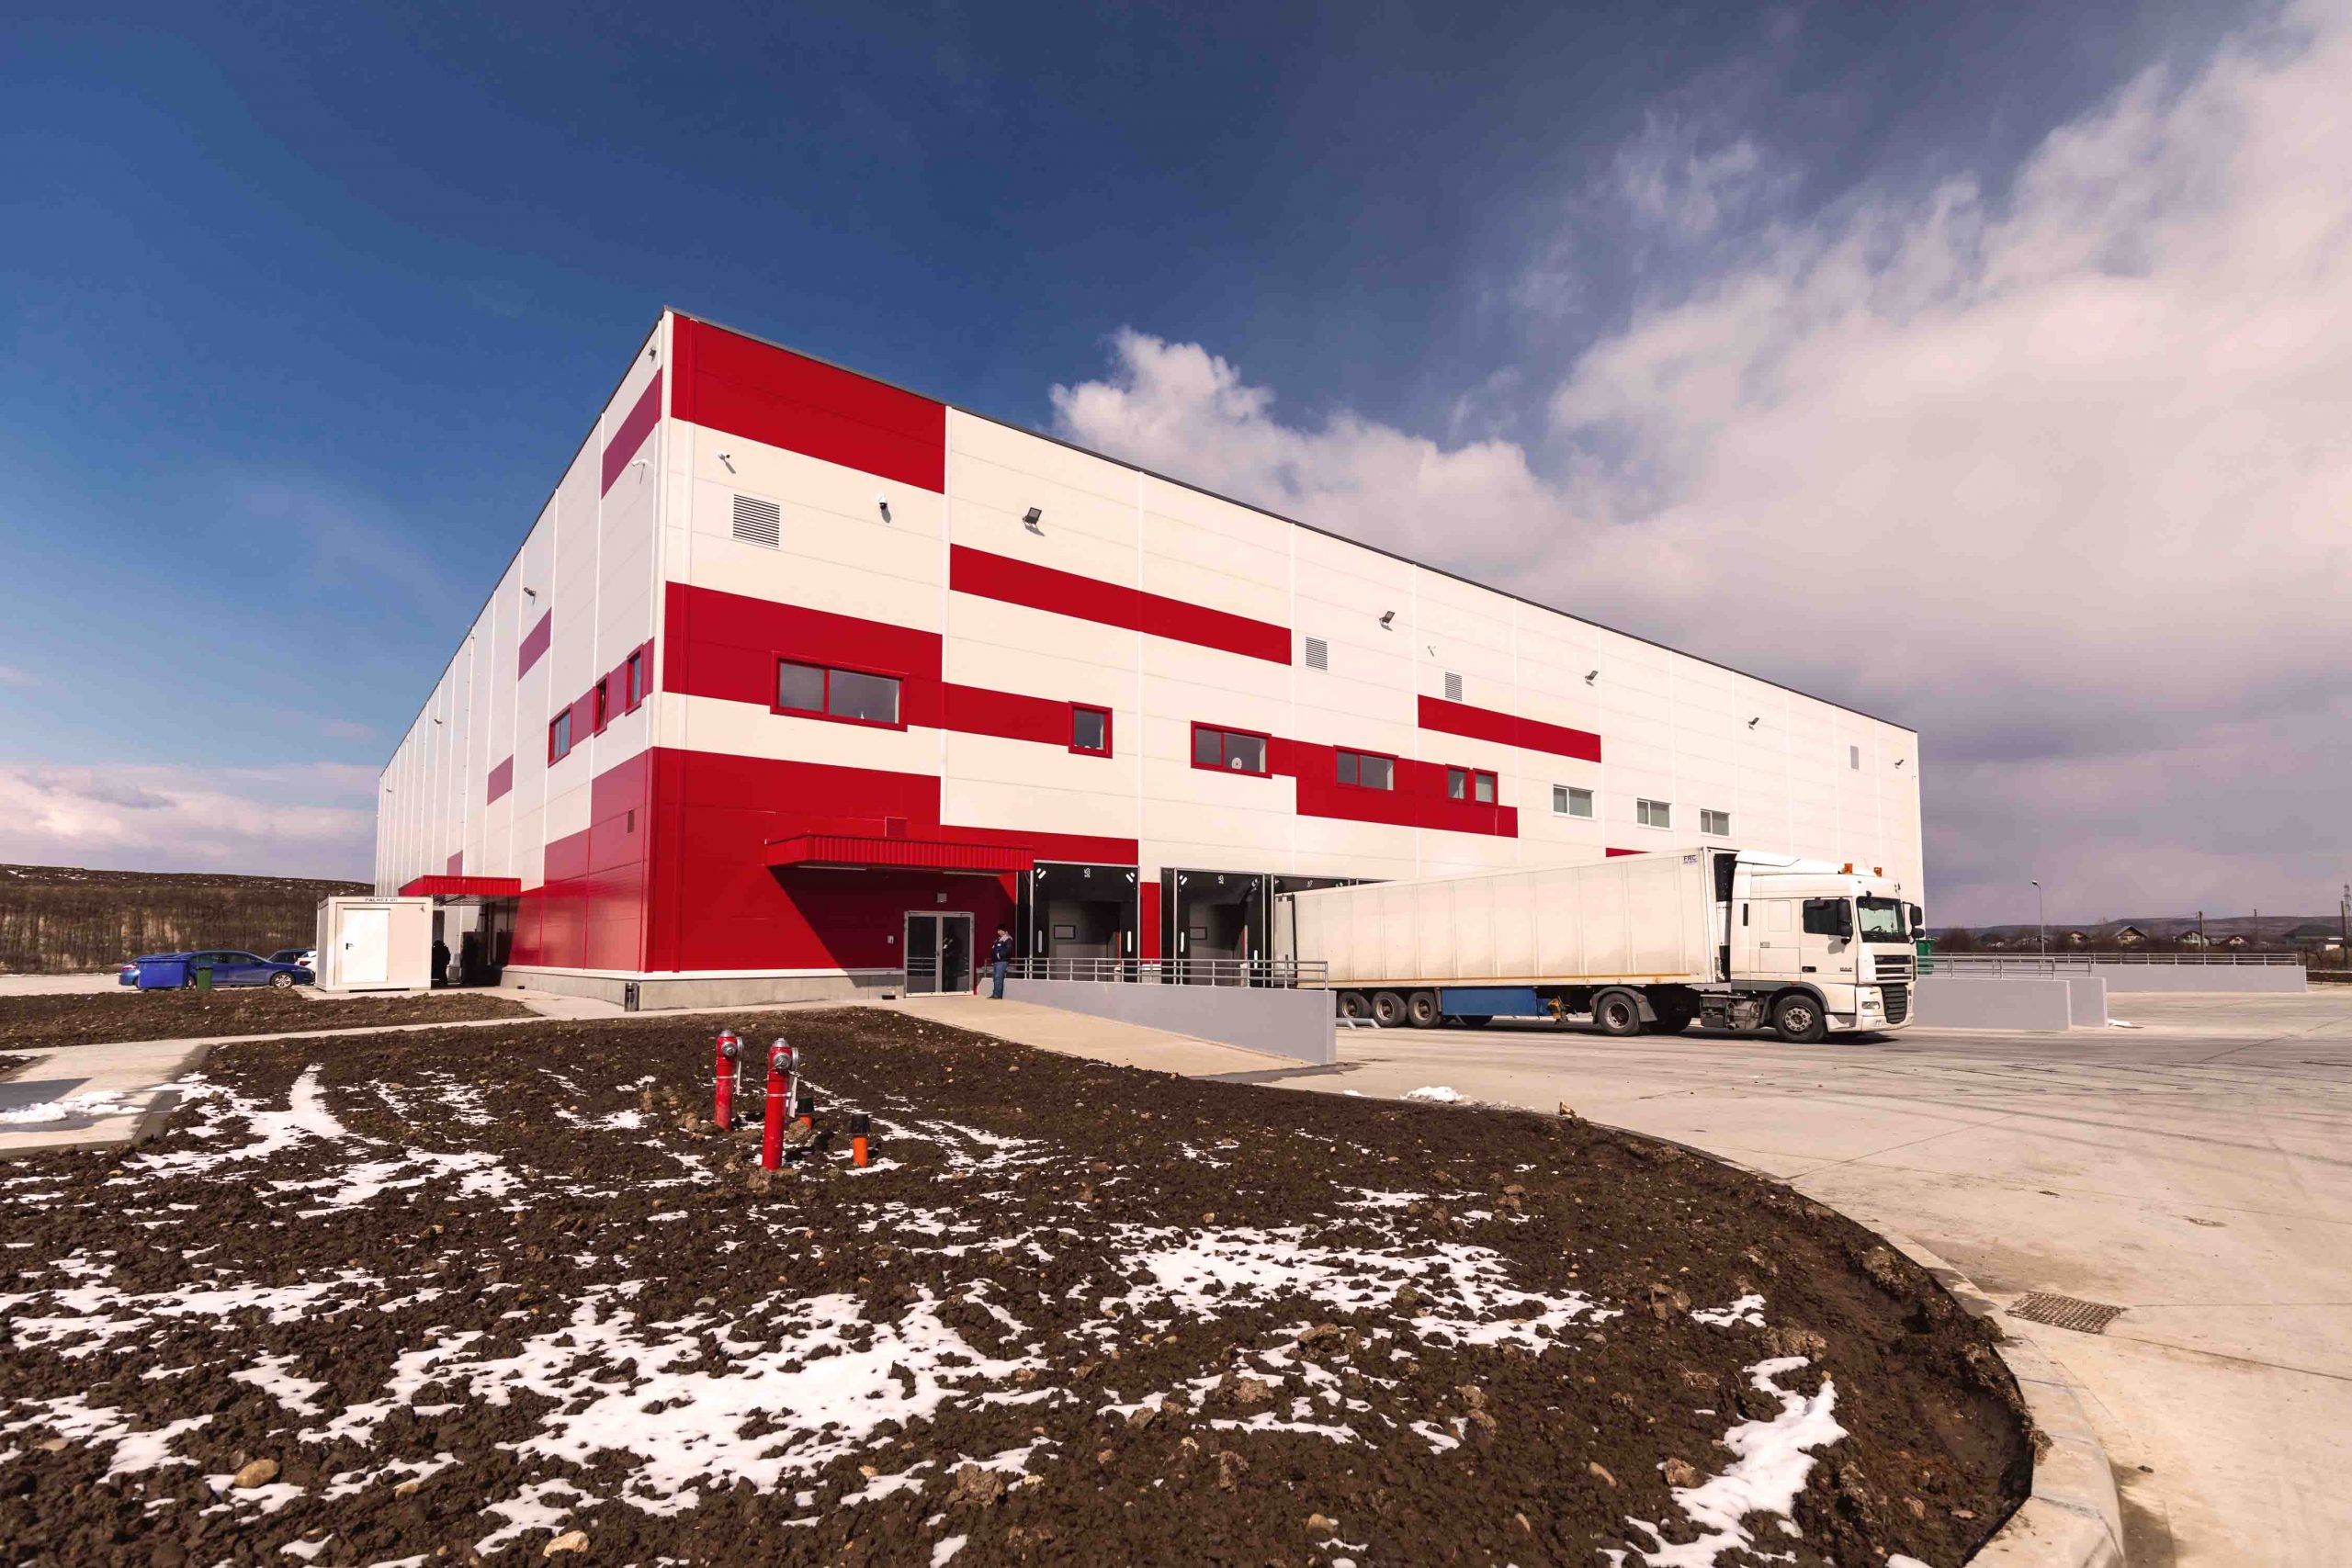 Pitesti Industrial Park – Temperature controlled warehouse for confidential client